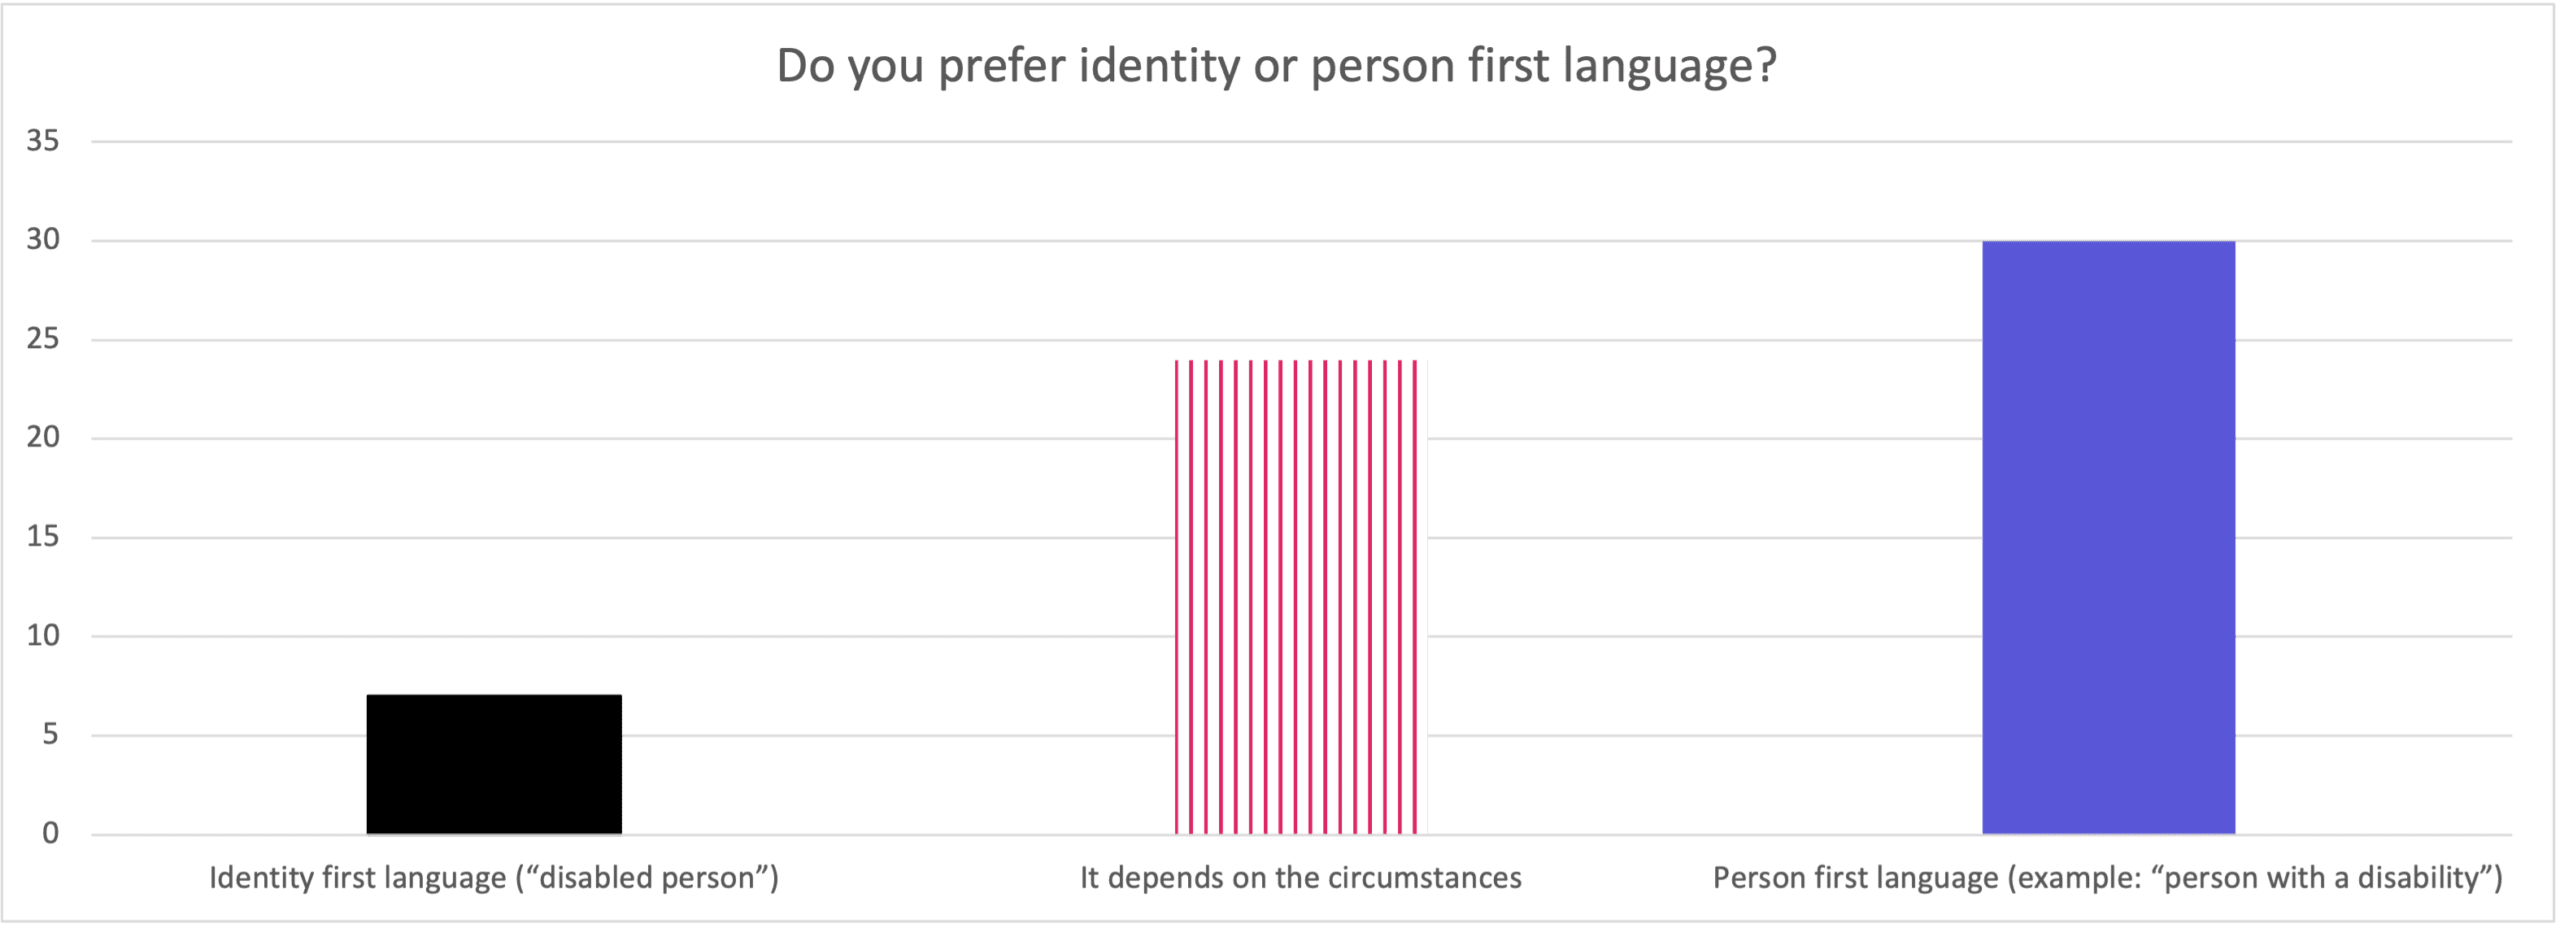 A chart showing that a majority of participants prefer person first language, a secondary number say it depends on the circumstance, and a minority prefer identity first.